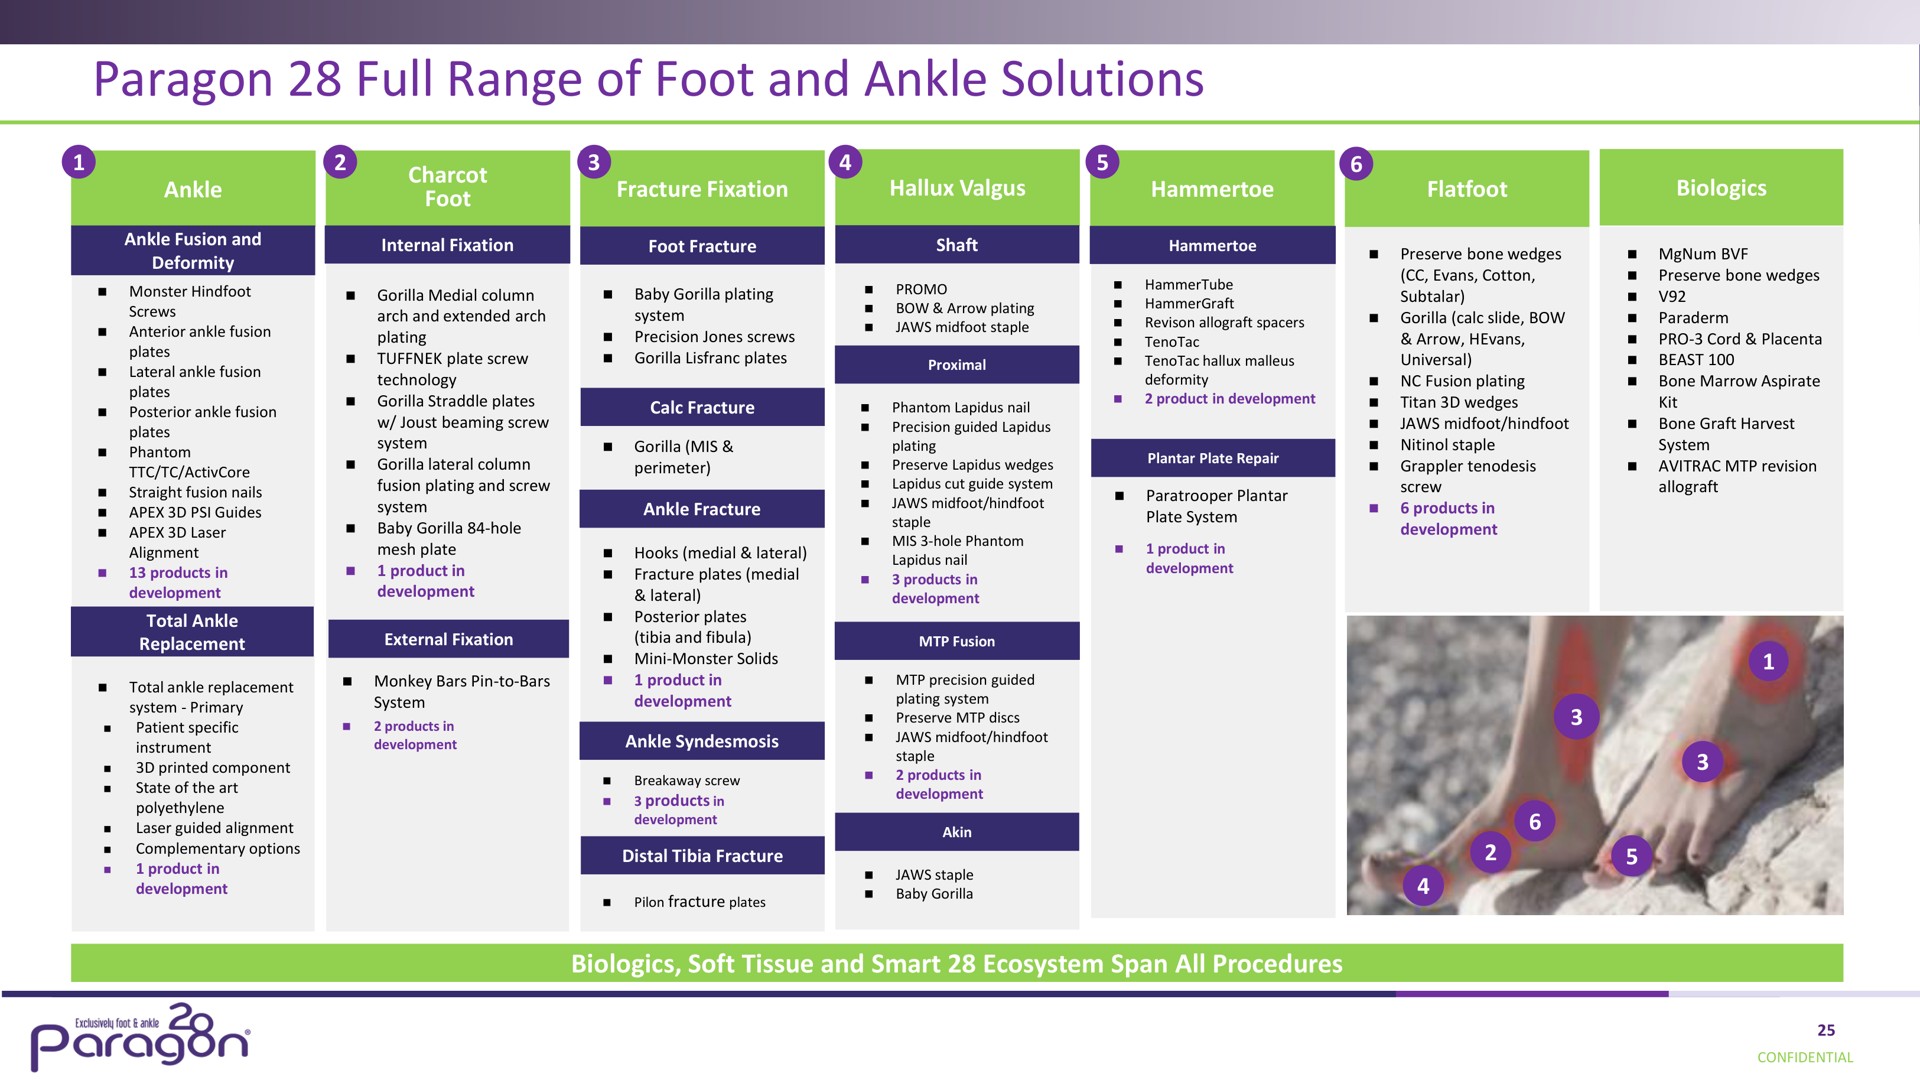 paragon full range of foot and ankle solutions | Paragon28